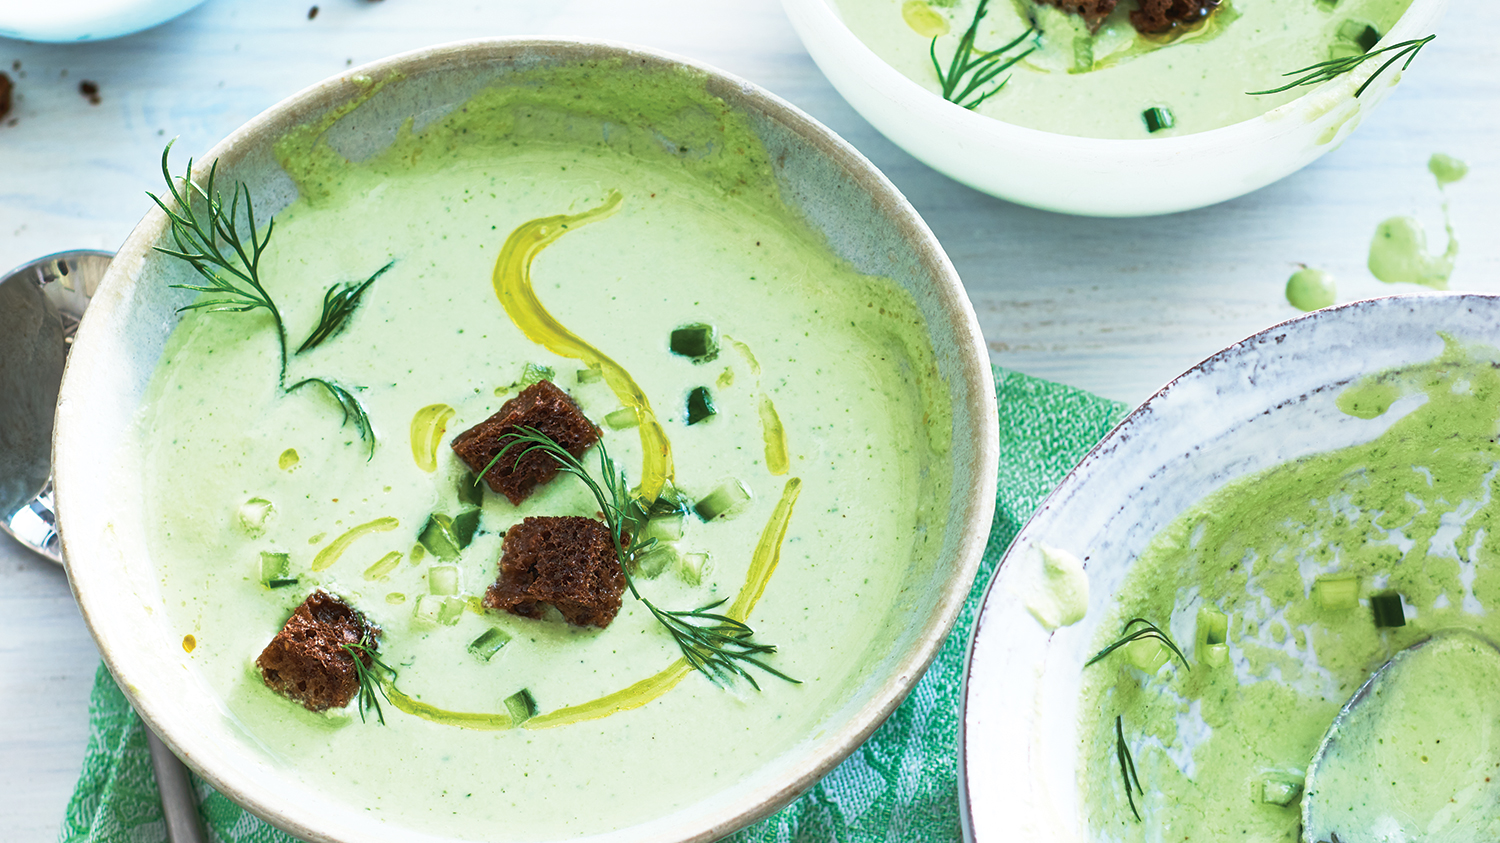 Chilled Cucumber & Dill Soup with Rye Croutons - Sobeys Inc.